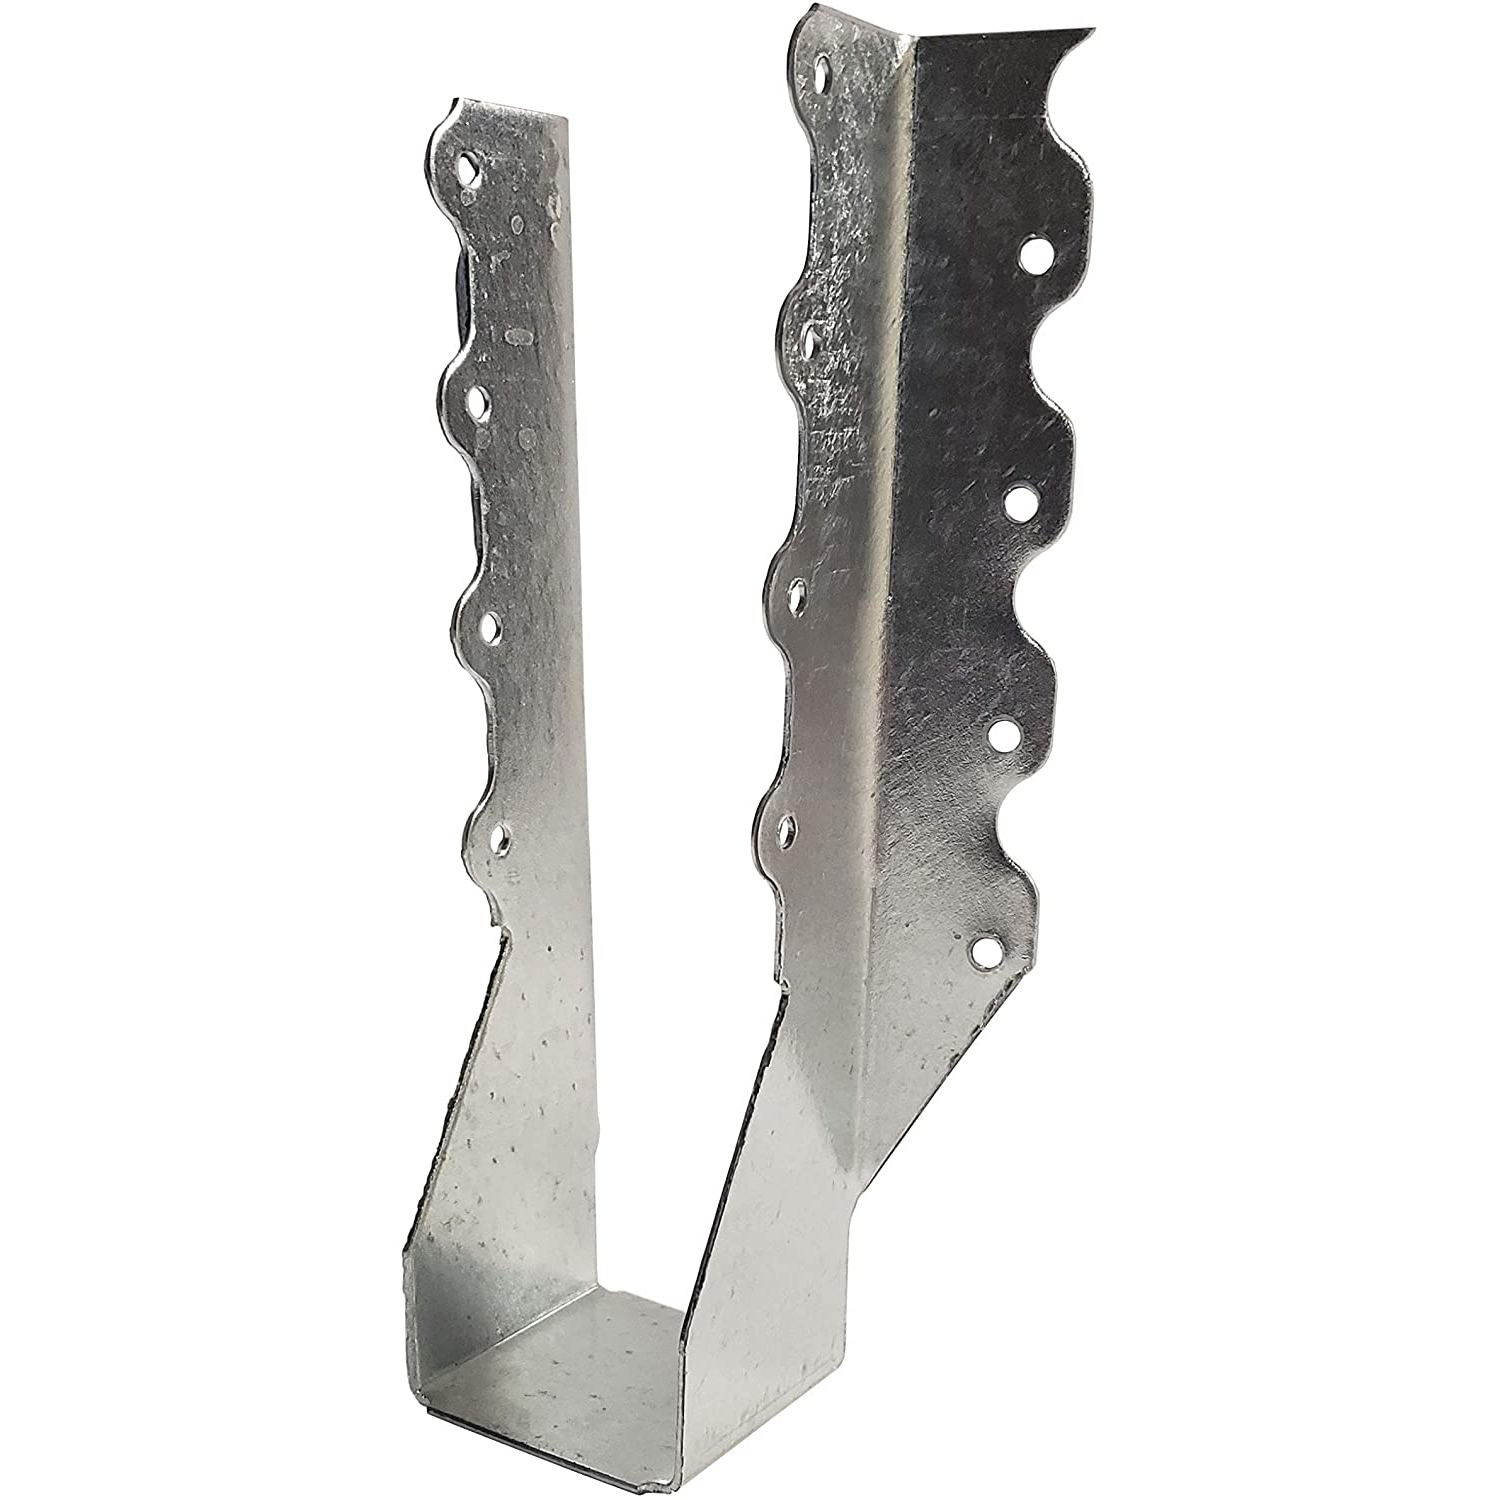 Buy 10 Pack Joist Hanger 2 X 8 Free Shipping Usa Xtreme Edeals